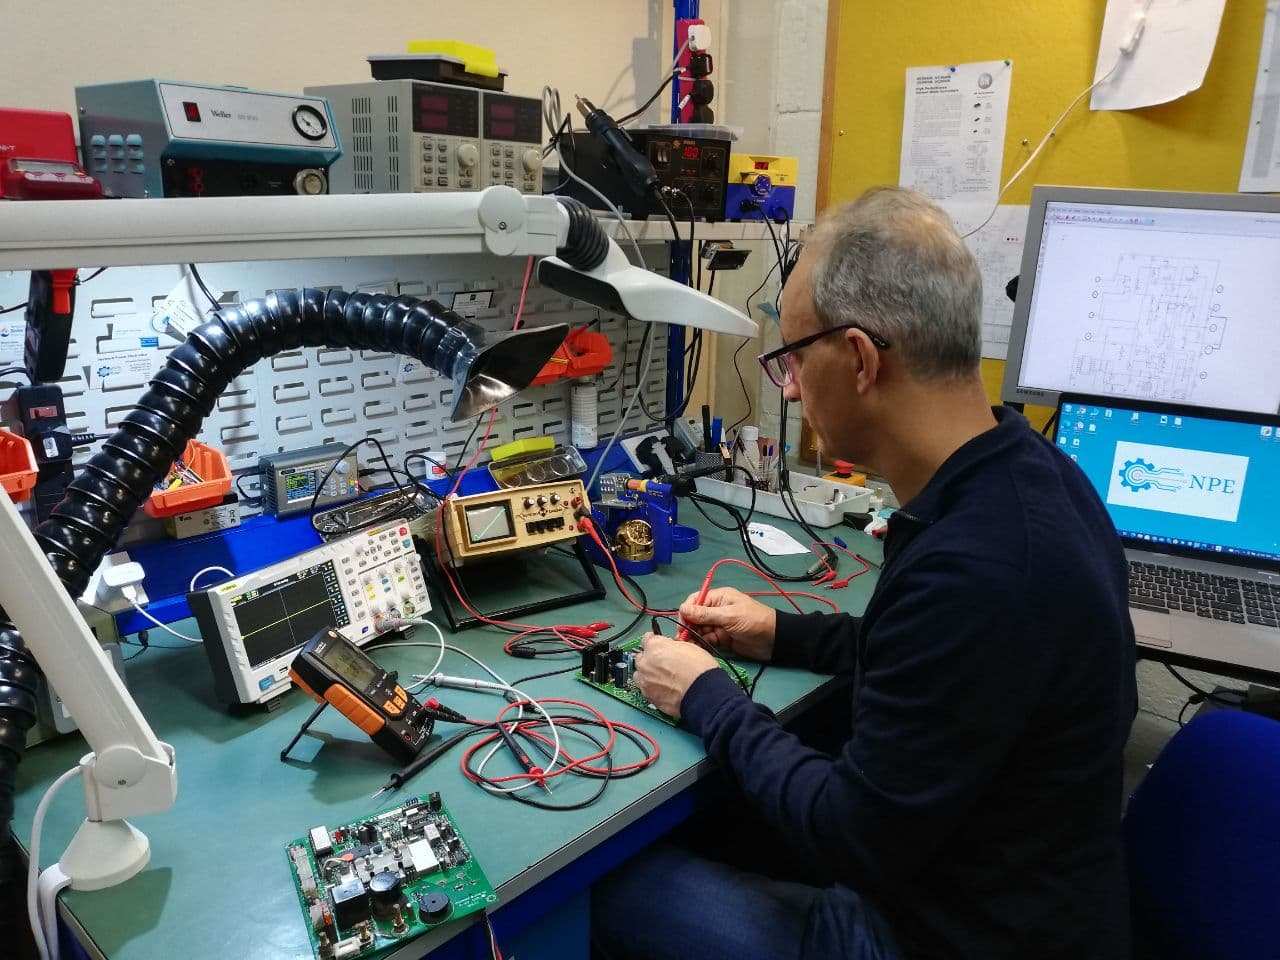 npe engineer testing pcb board with multimeter